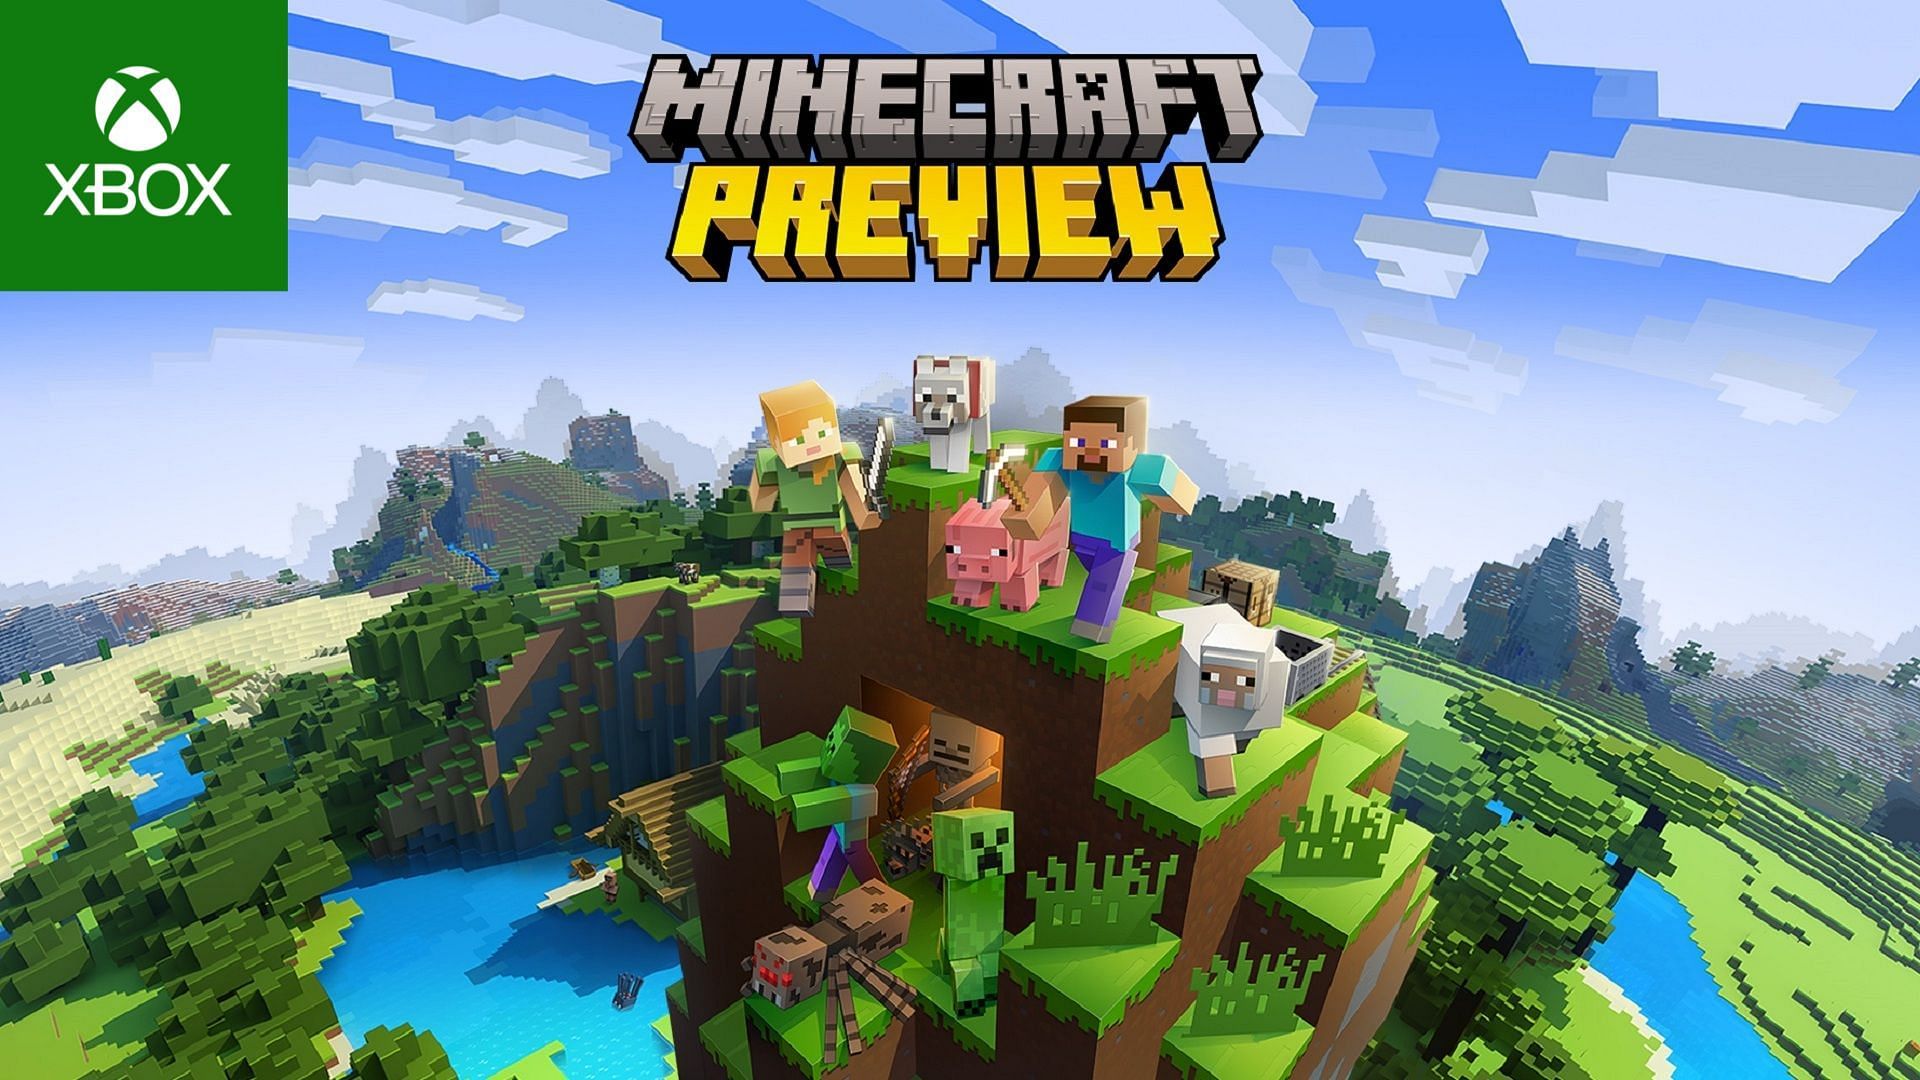 Minecraft Preview on Xbox consoles can be downloaded as a separate program (Image via Mojang/Microsoft)